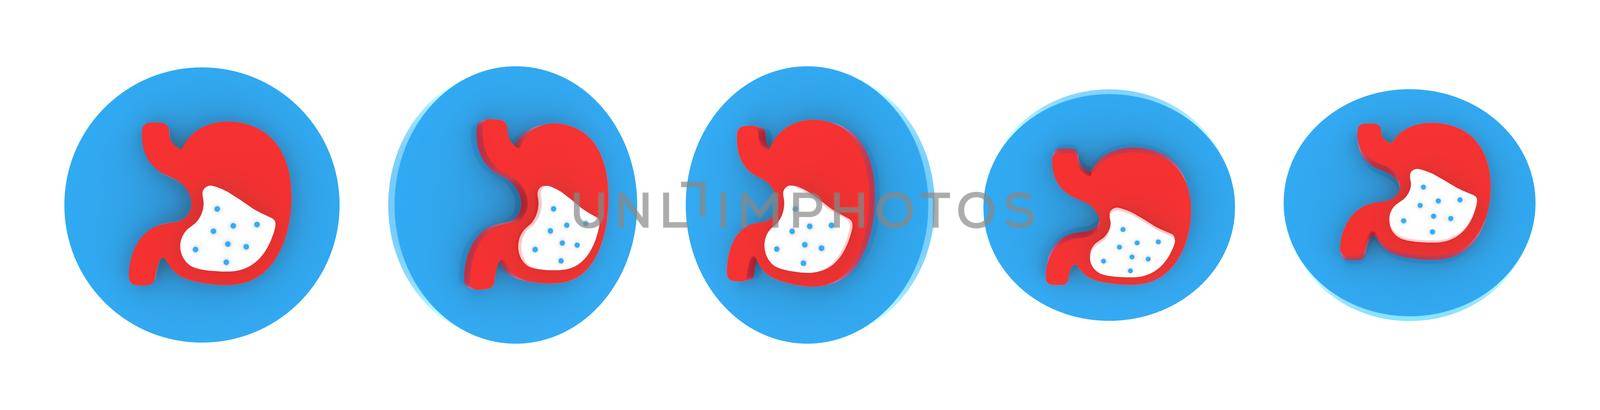 Volumetric round medical icon set, blue, red and white soft plastic. Different viewing angles, 3d rendering illustration